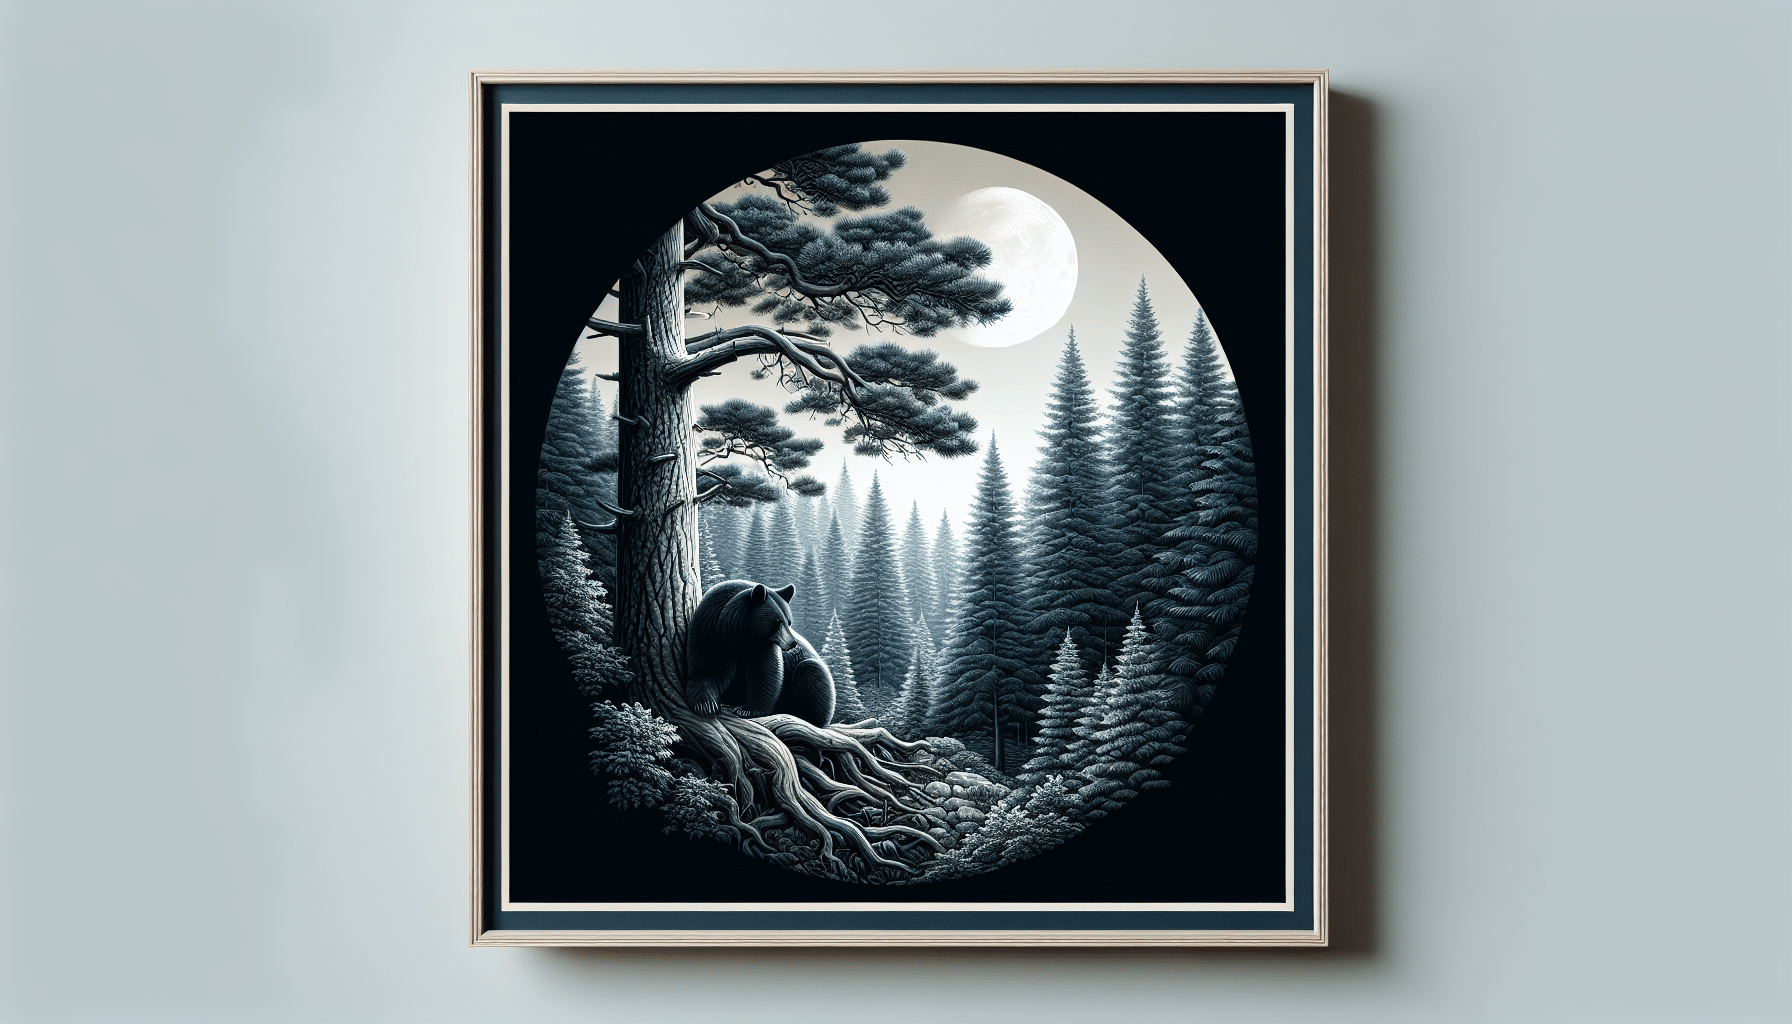 An exquisite depiction of a black bear's natural habitat during the night. The scene captures the dense wilderness with towering pine trees and a full moon illuminating the sky. Hidden amongst the branches of a sturdy tree is a black bear, nestled comfortably in its arboreal sanctuary. The serene image reveals the calmness of a forest at night, bathed in the soft glow of moonlight, devoid of any human presence, text, brand names, or logos.